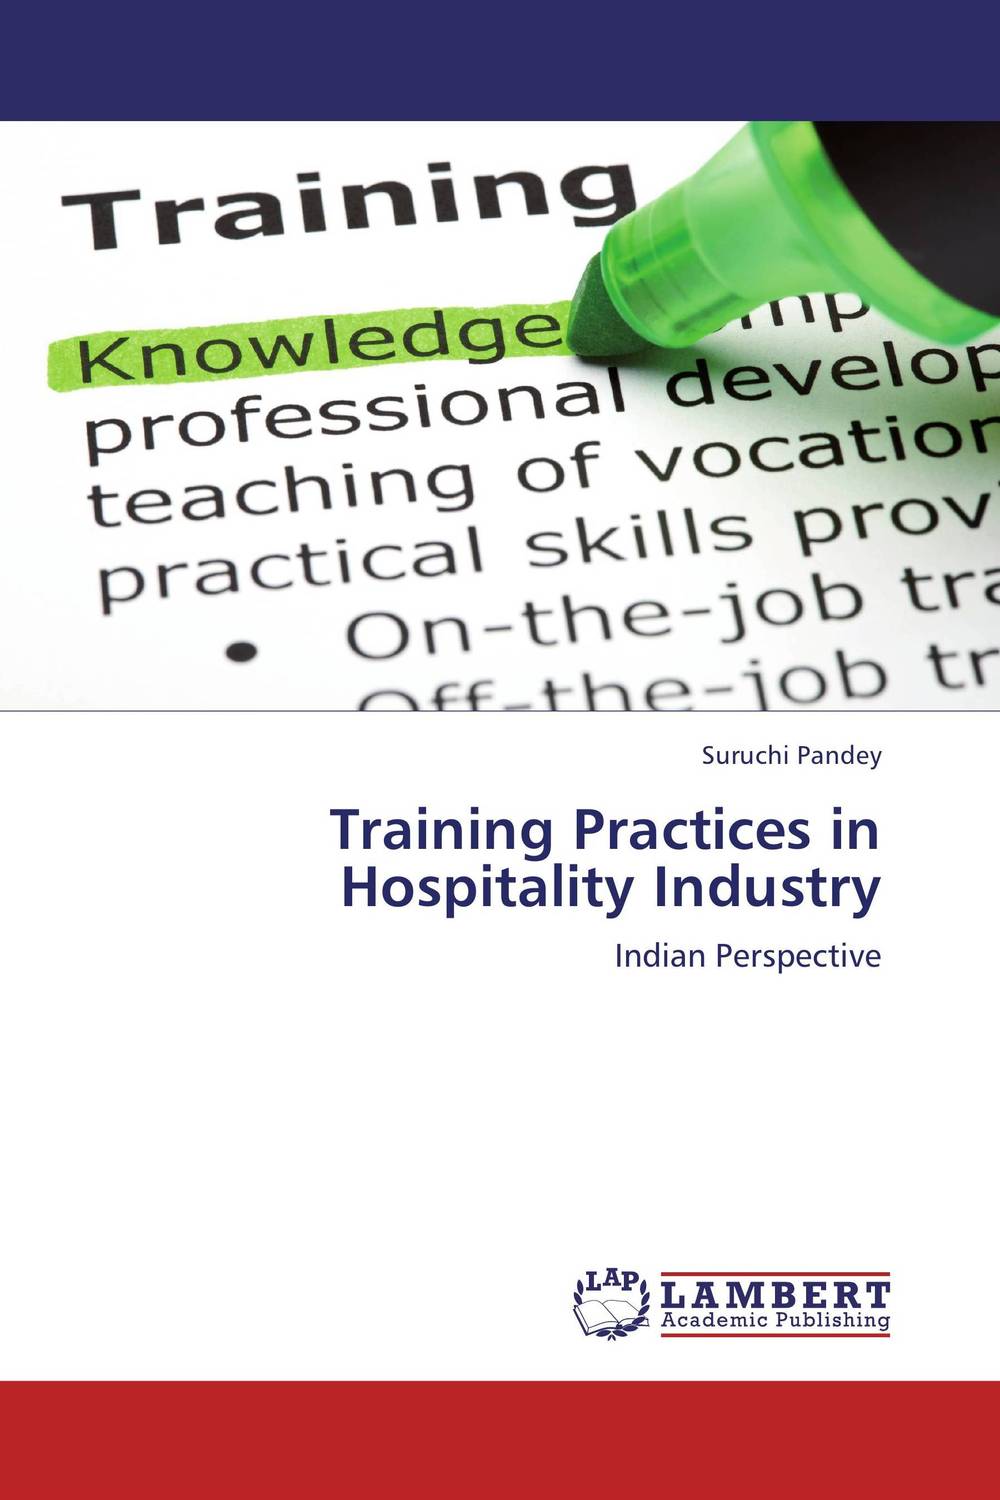 Training Practices in Hospitality Industry